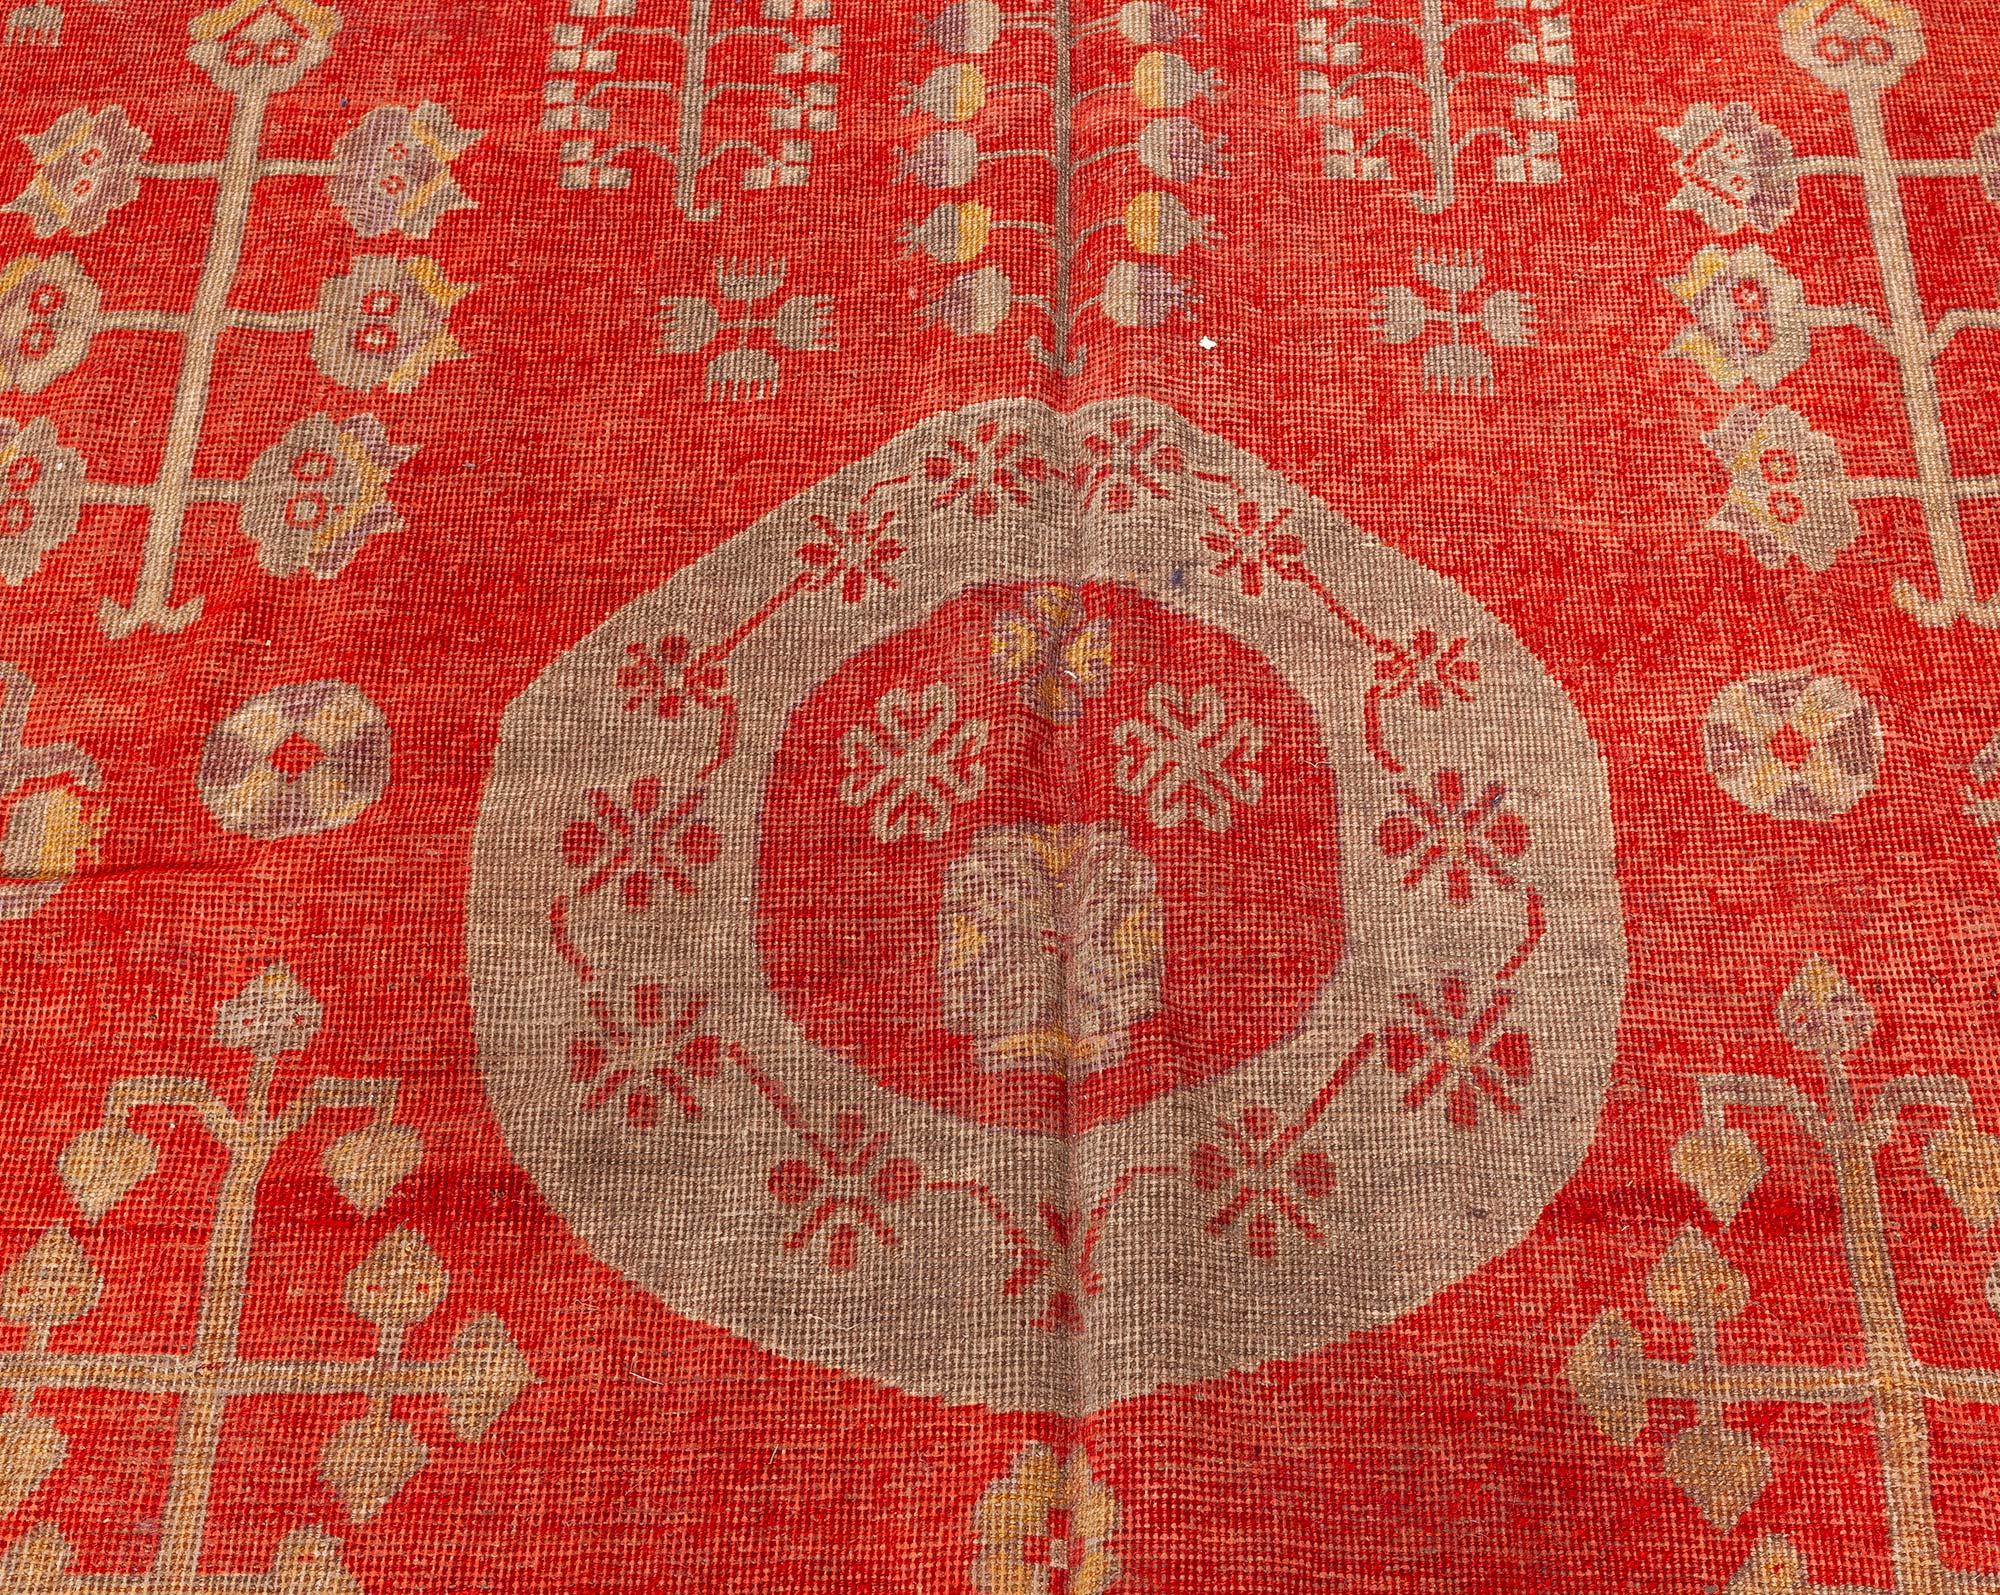 High-quality Red Samarkand, Khotan Hand knotted wool rug.
Size: 7'0